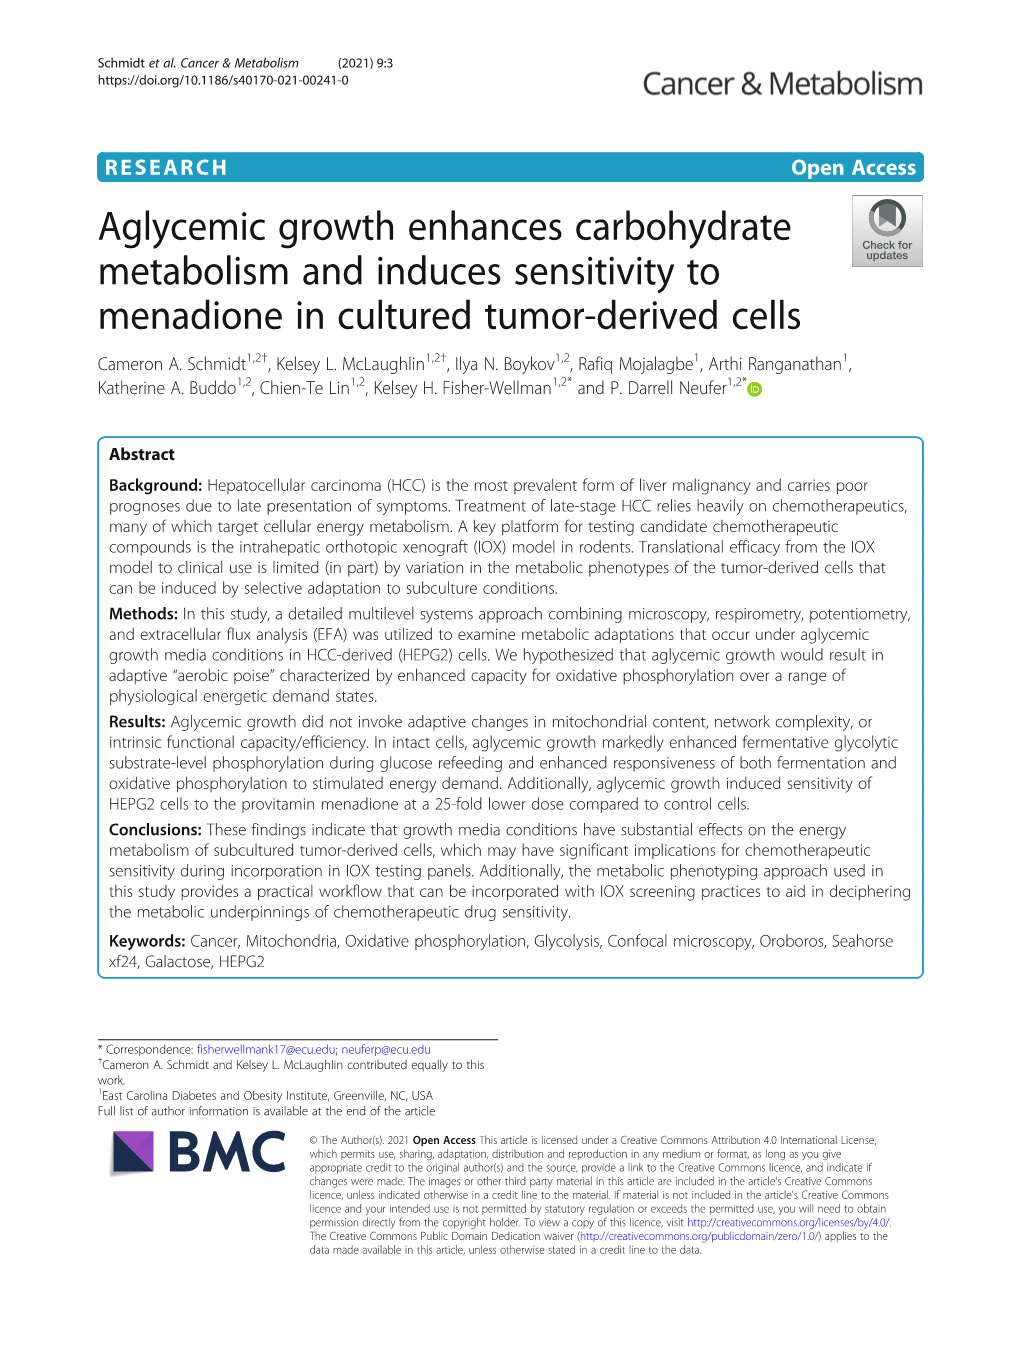 Aglycemic Growth Enhances Carbohydrate Metabolism and Induces Sensitivity to Menadione in Cultured Tumor-Derived Cells Cameron A